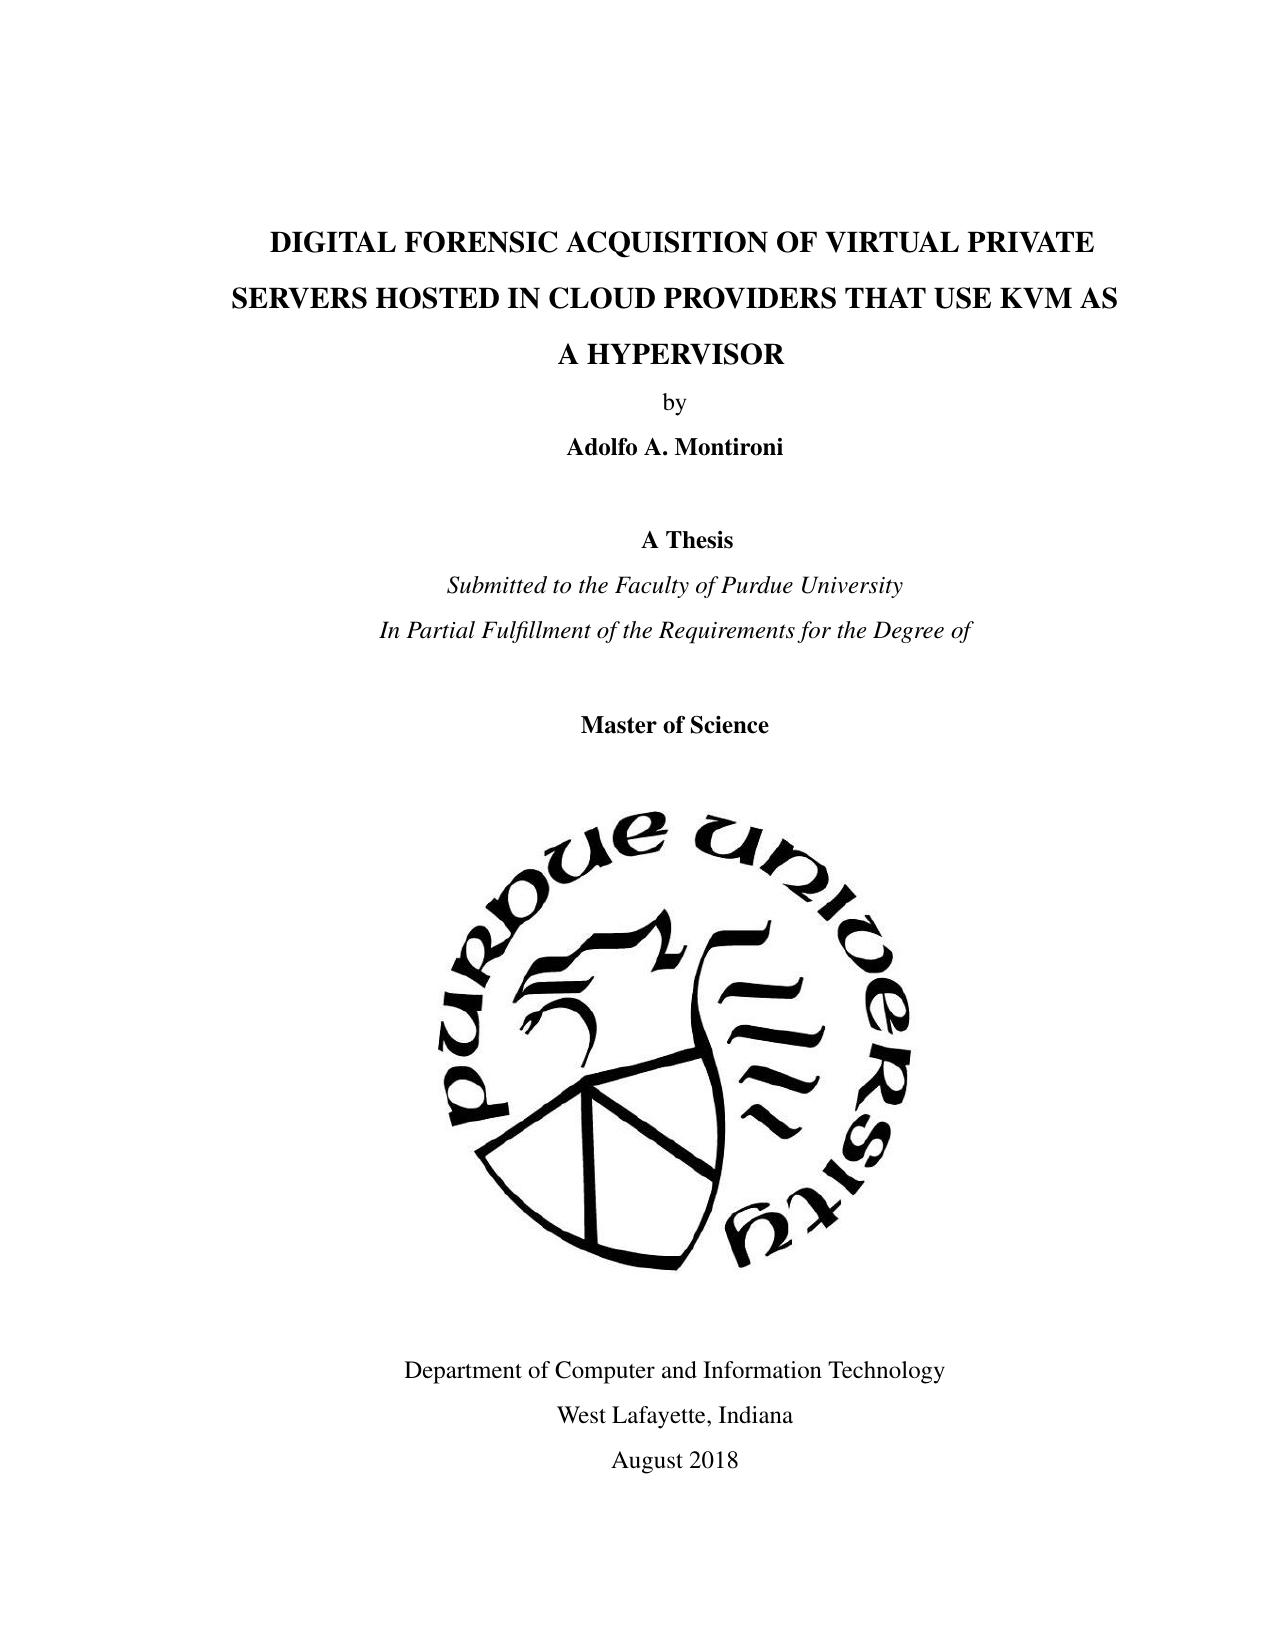 [Master's Thesis] Digital Forensic Acquisition of Virtual Private Servers Hosted in Cloud Providers that Use KVM as a Hypervisor. by Adolfo A. Montironi